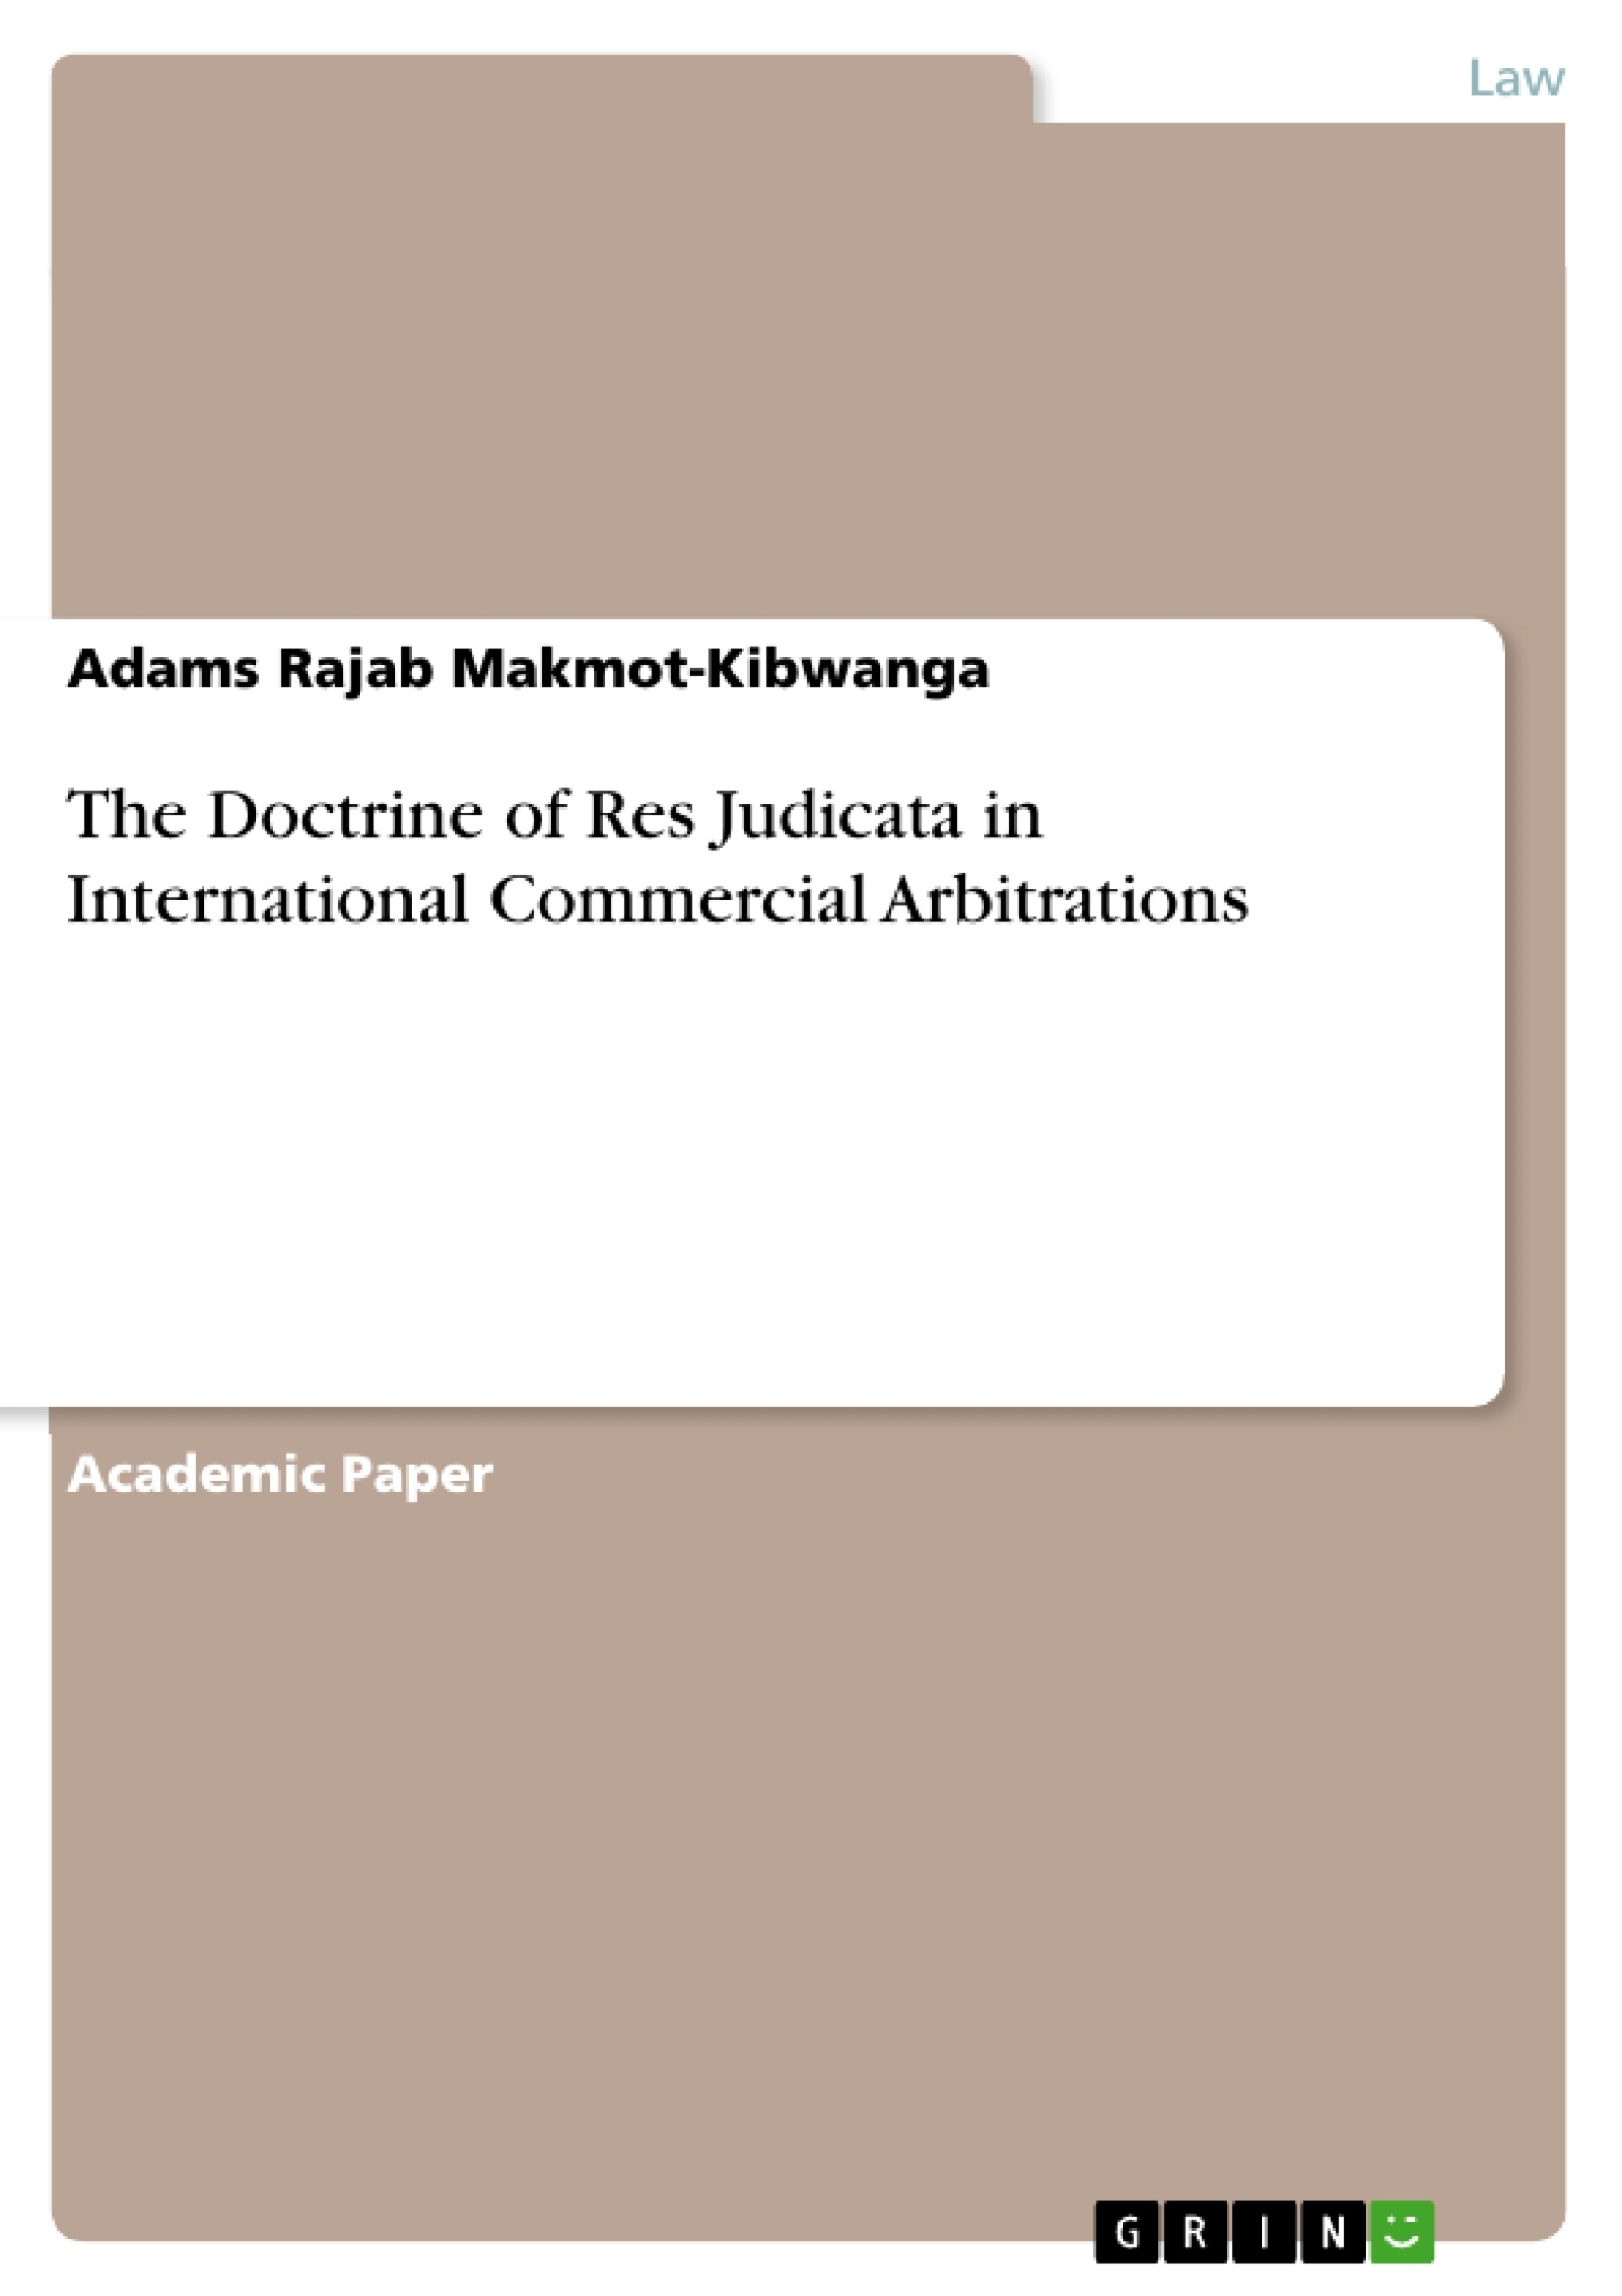 Titre: The Doctrine of Res Judicata in International Commercial Arbitrations